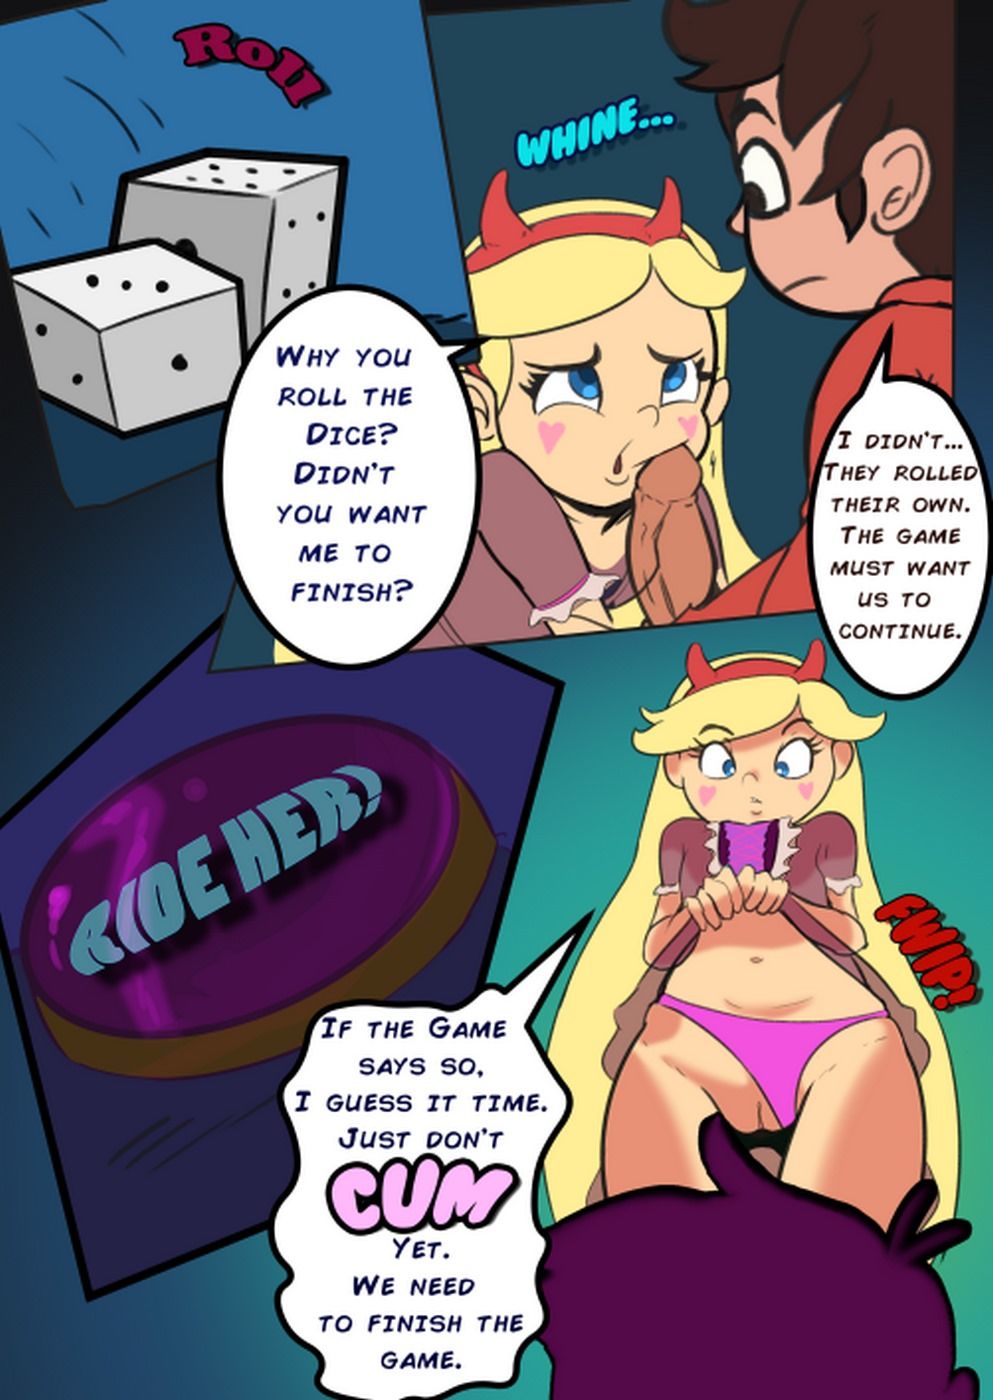 [Honeyshot] Star Vs The Forces Of Evil - Stars Board Game page 15